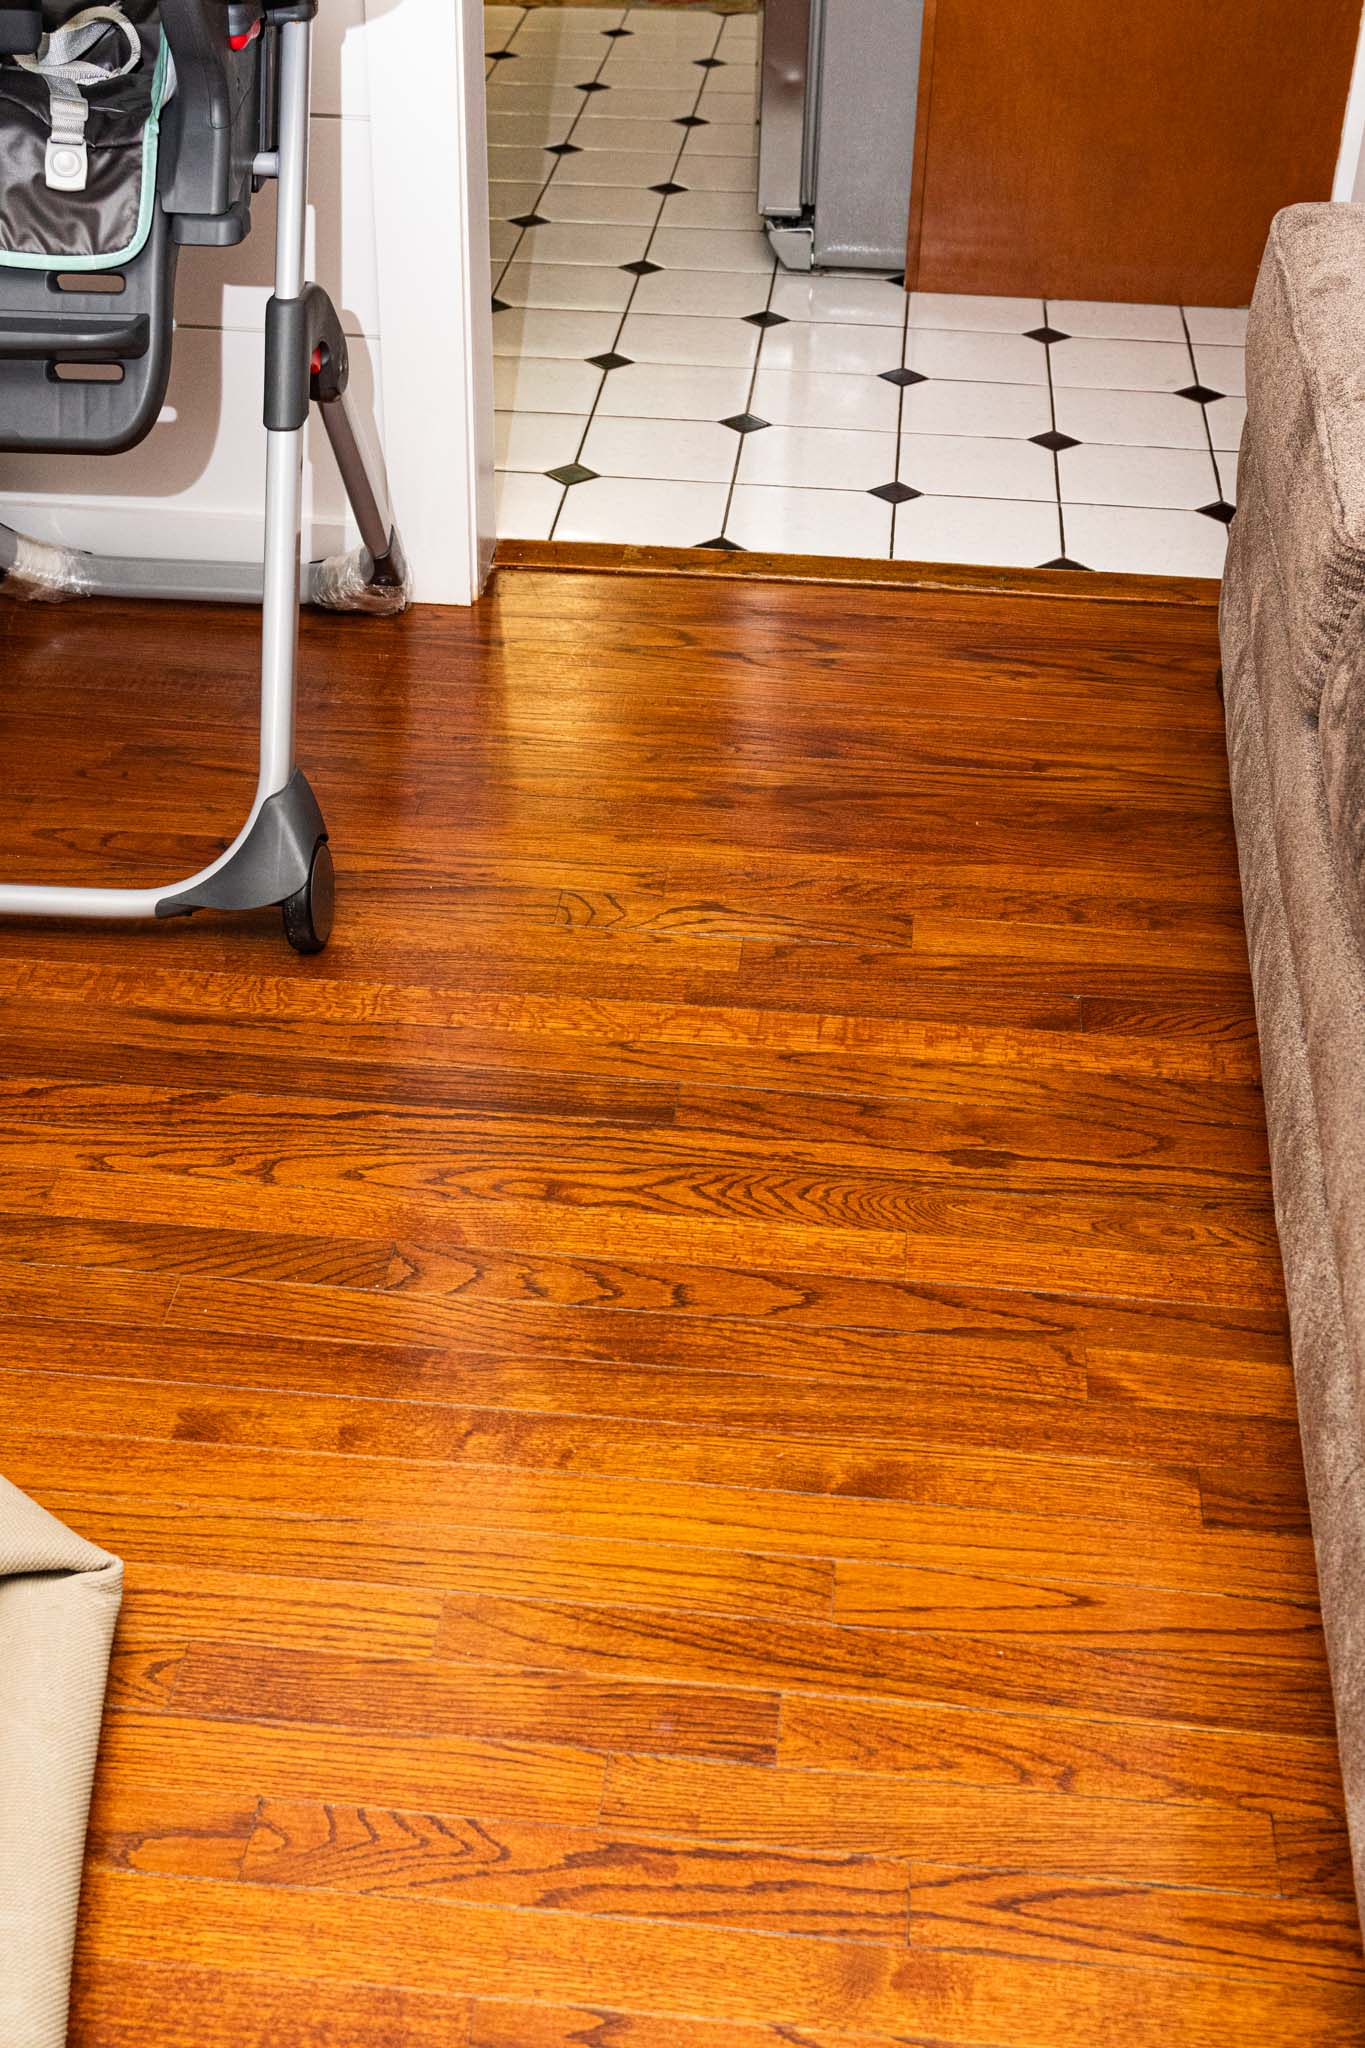 How To Clean Sticky Floors Country, How To Clean Sticky Hardwood Floors